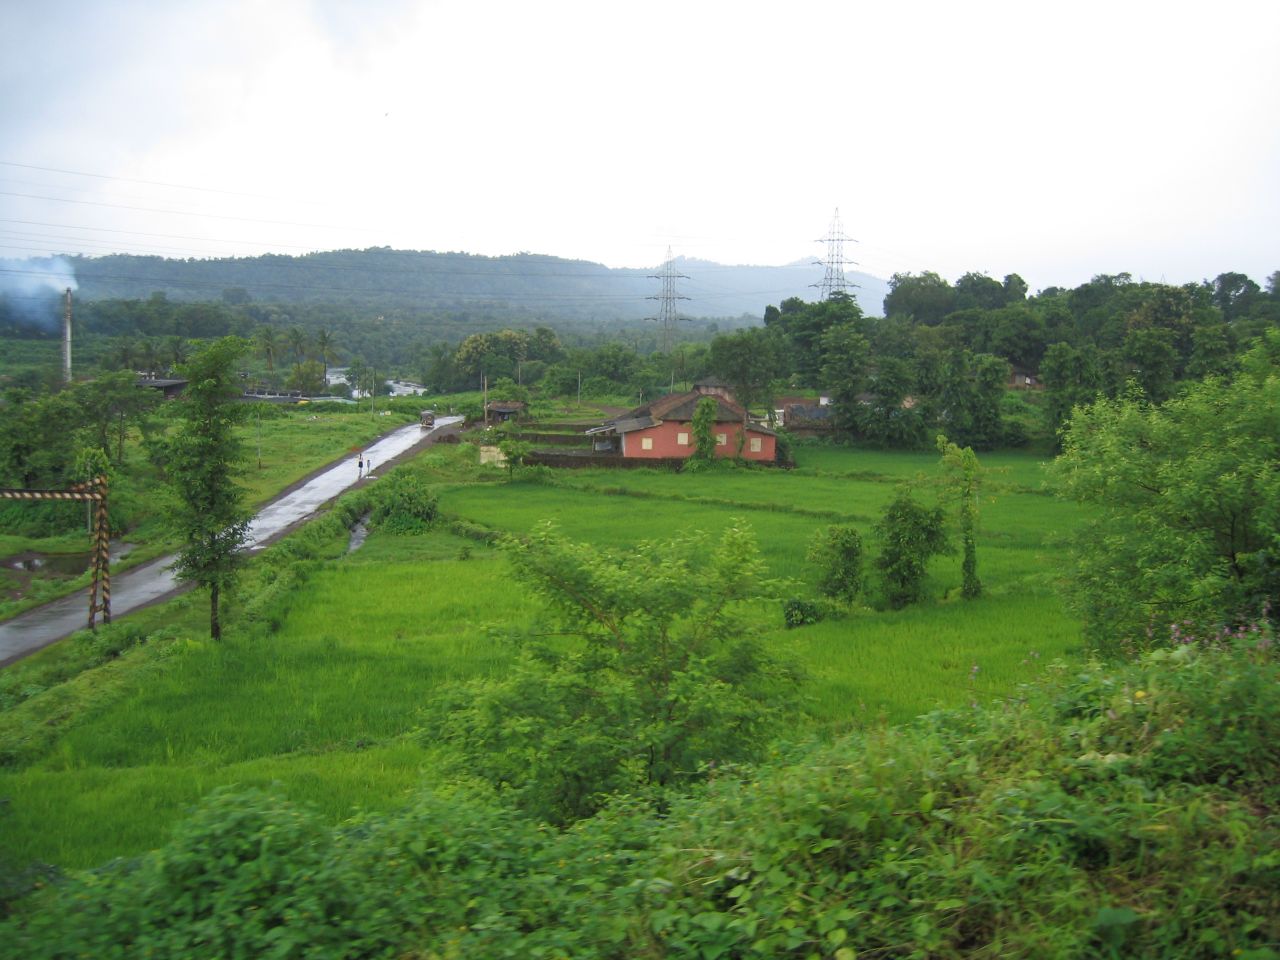 the lush green countryside overlooks an overcast day